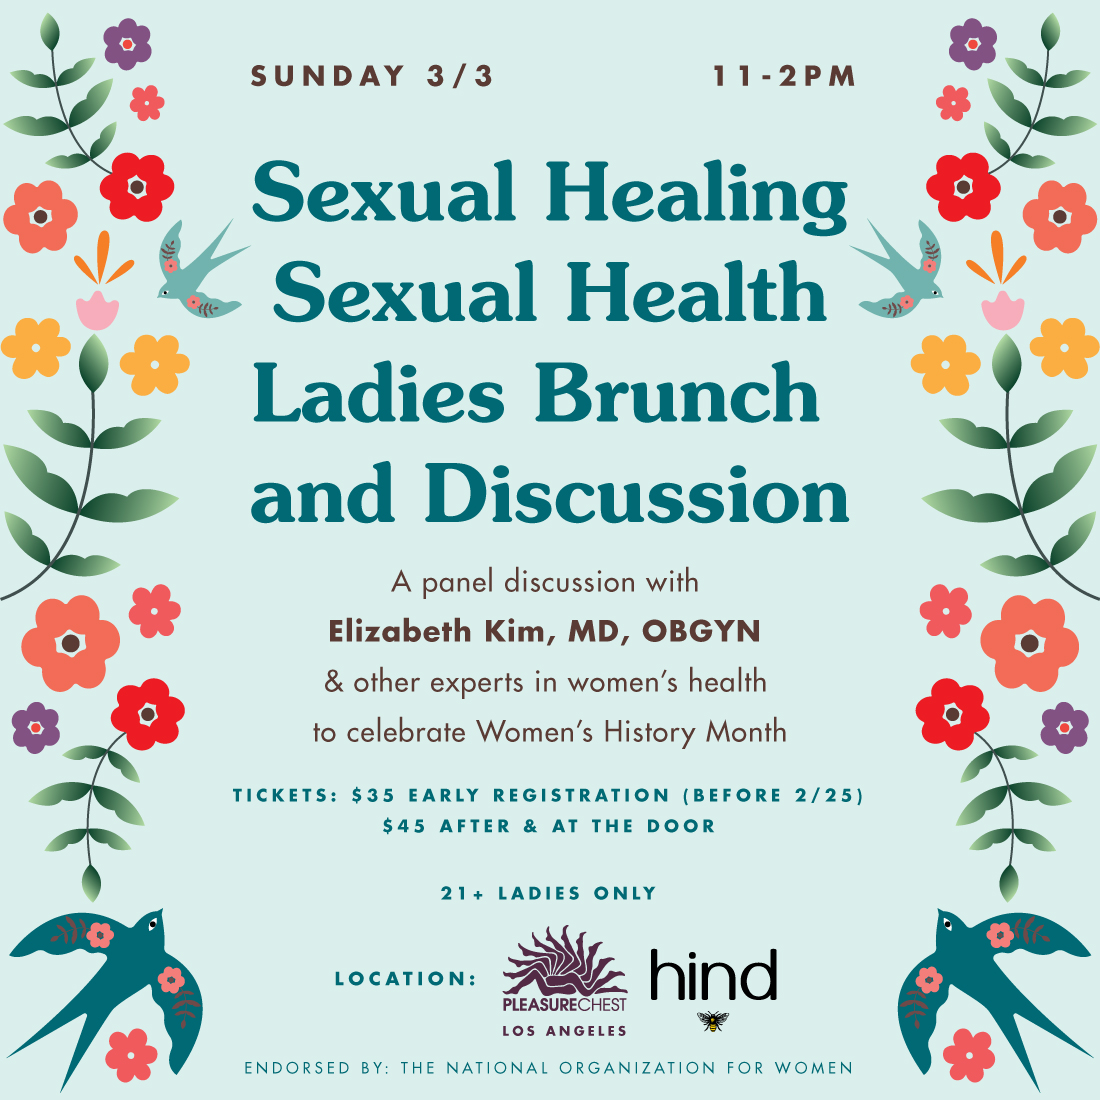 Get your brunch 🥞 on this Sunday at Hind @PleasureMedLA and celebrate Women's History Month with this panel of women's health experts! Get tickets here: bit.ly/3T1sriV